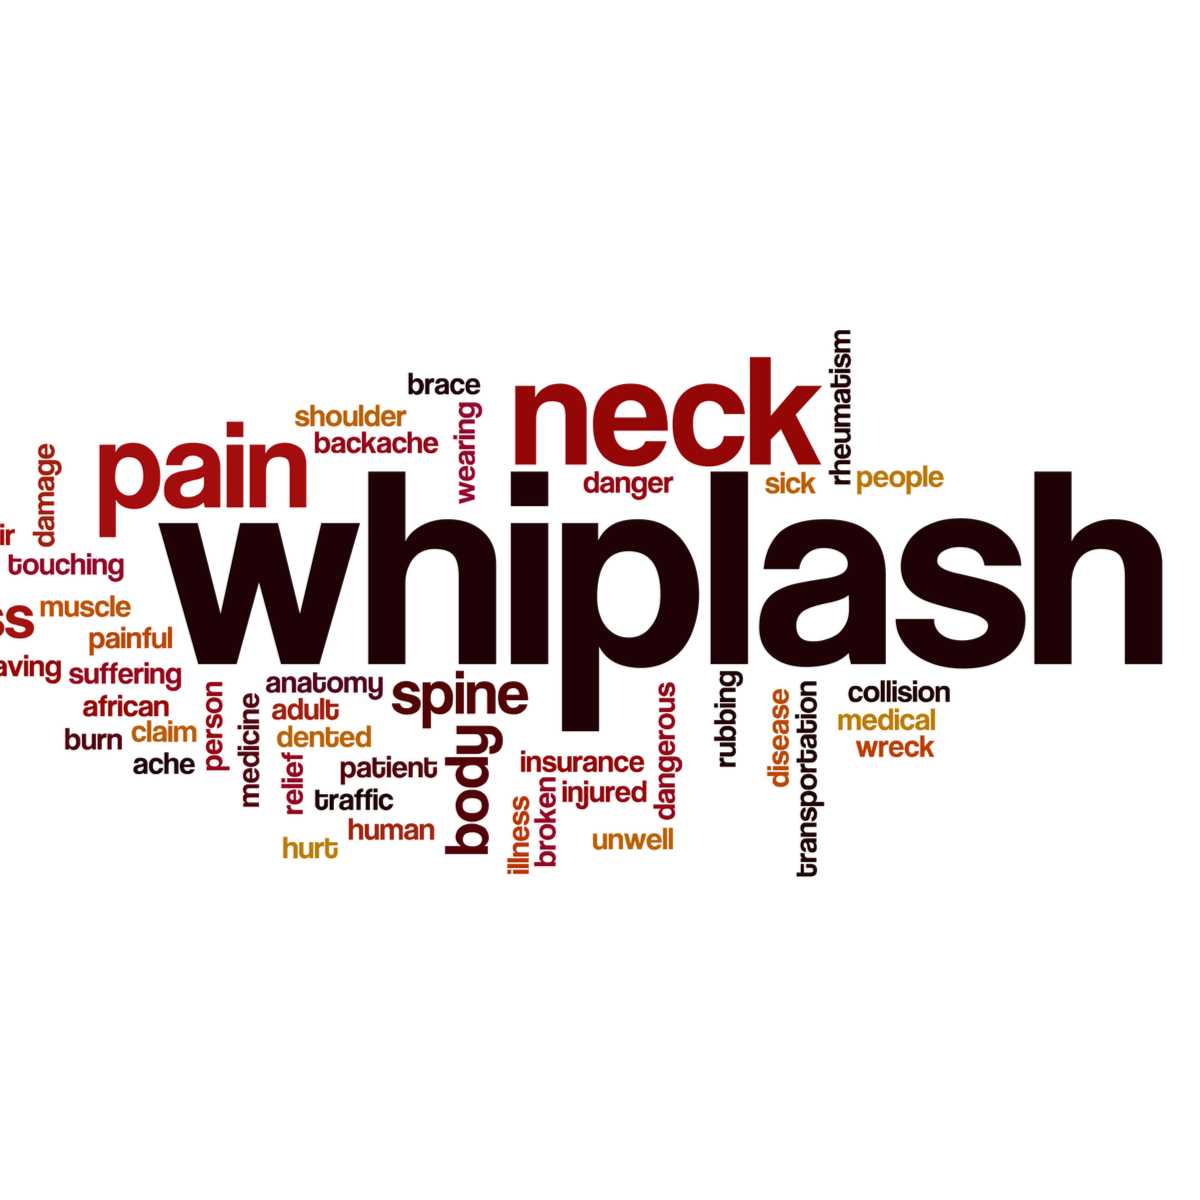 Will Chiropractic Adjustments for Whiplash Treatment Near Woodinville Make a Healthy Difference?